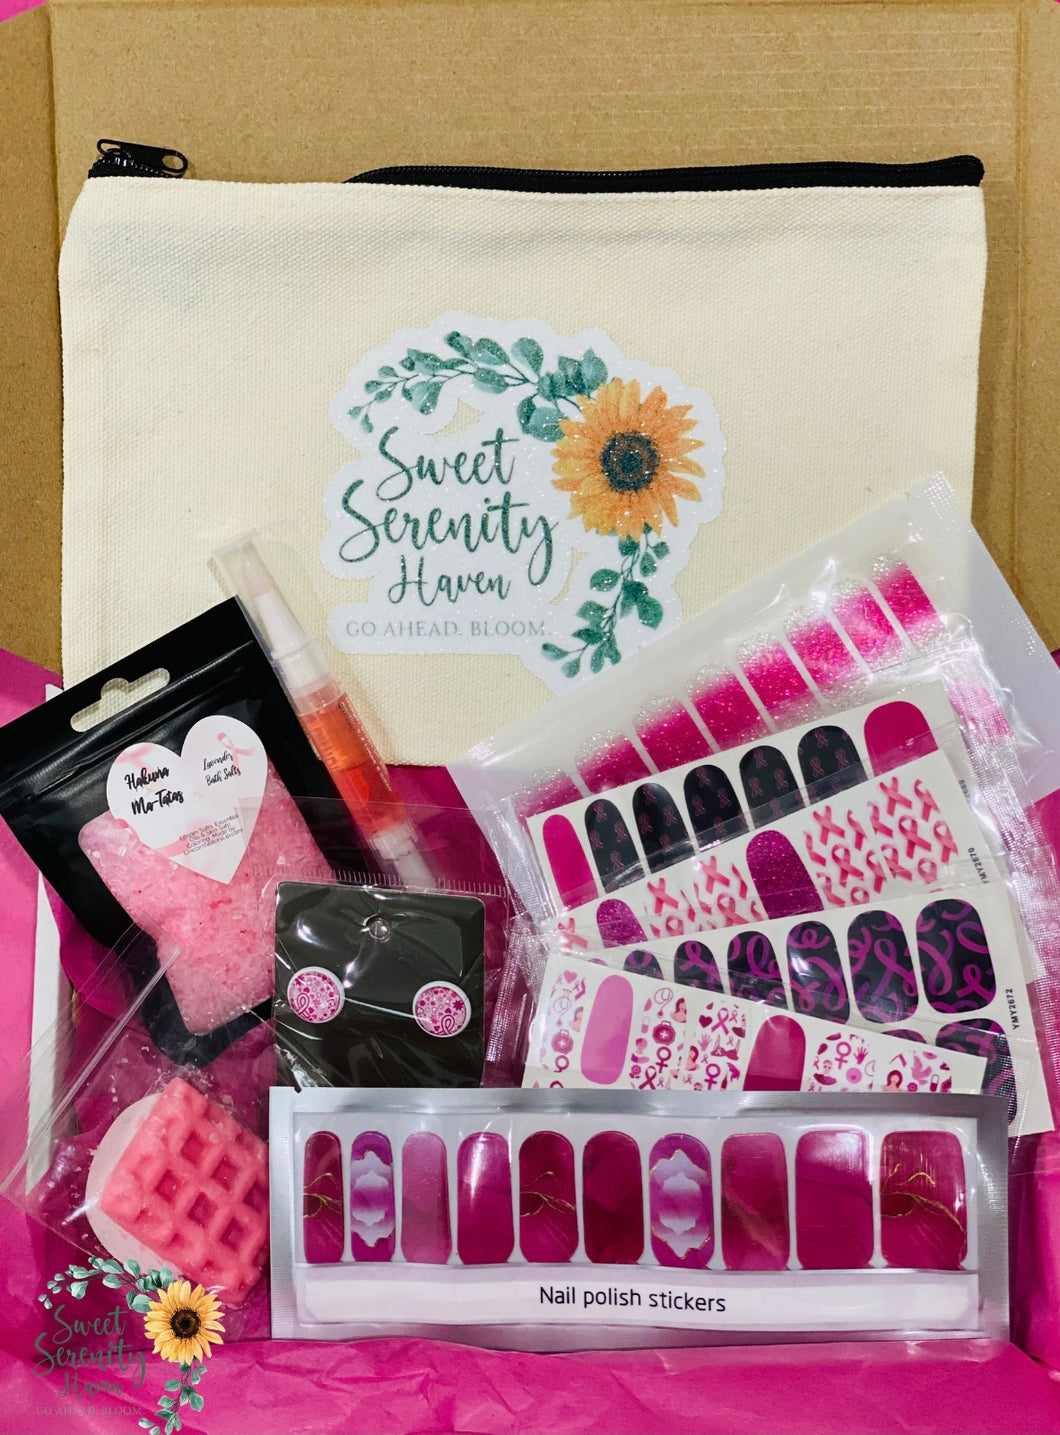 Breast Cancer Awareness Package ($5 each box donated to charity)